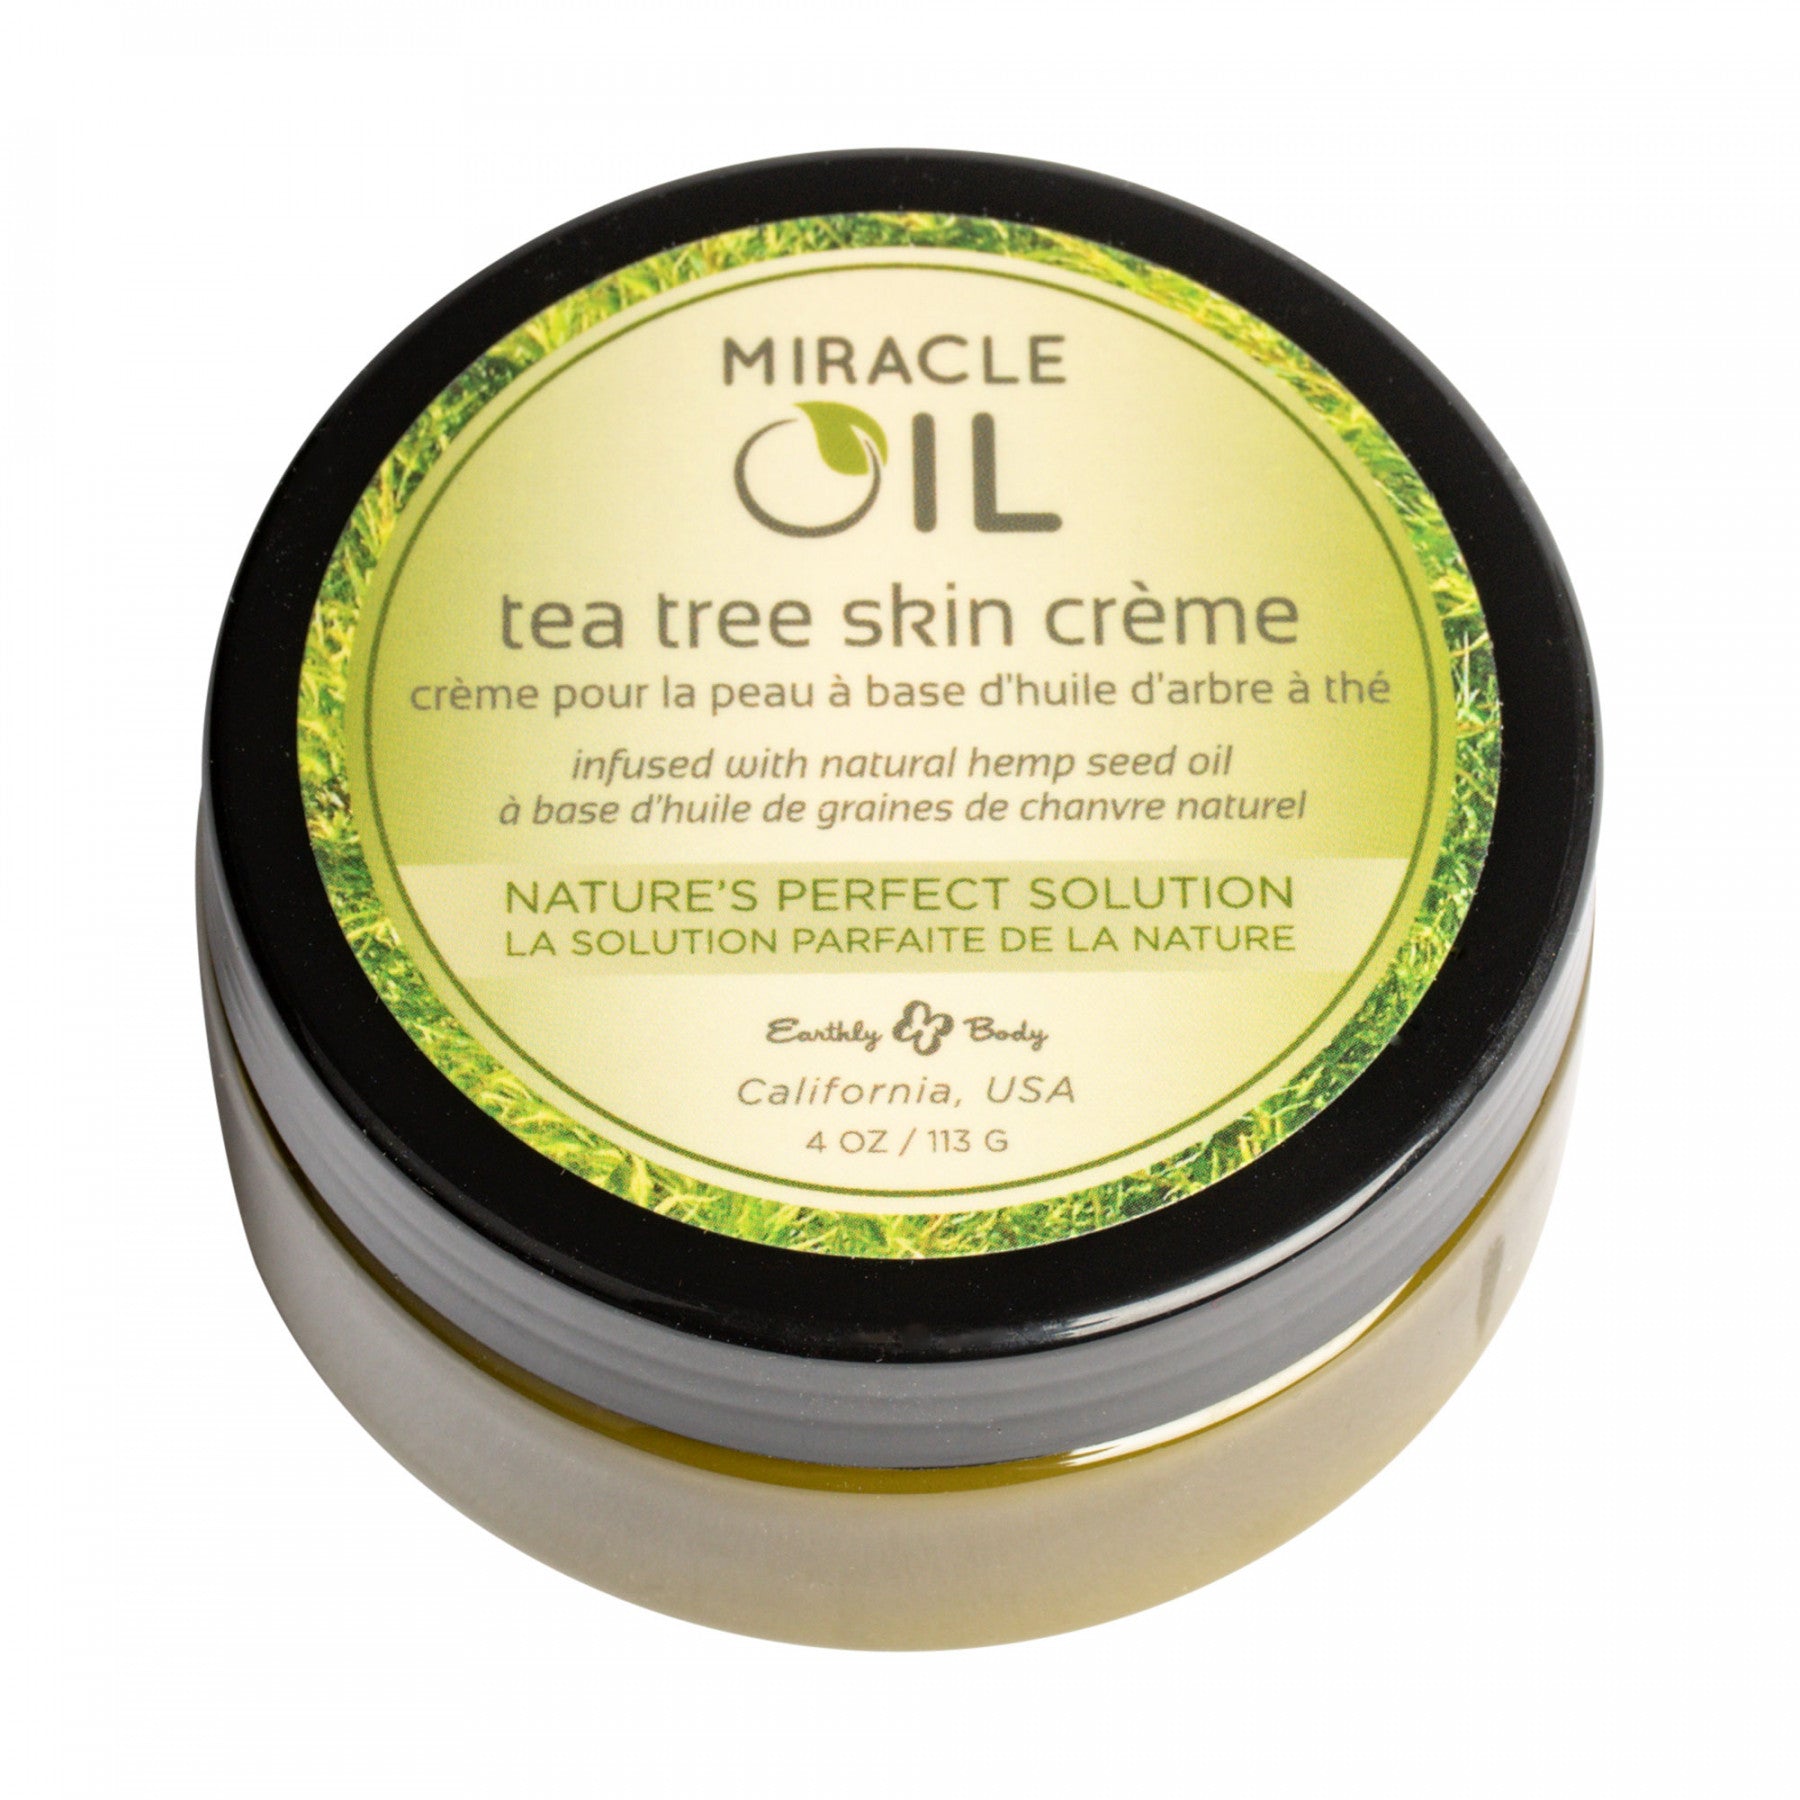 Round container with green label for Miracle Oil Tea Tree Skin Creme